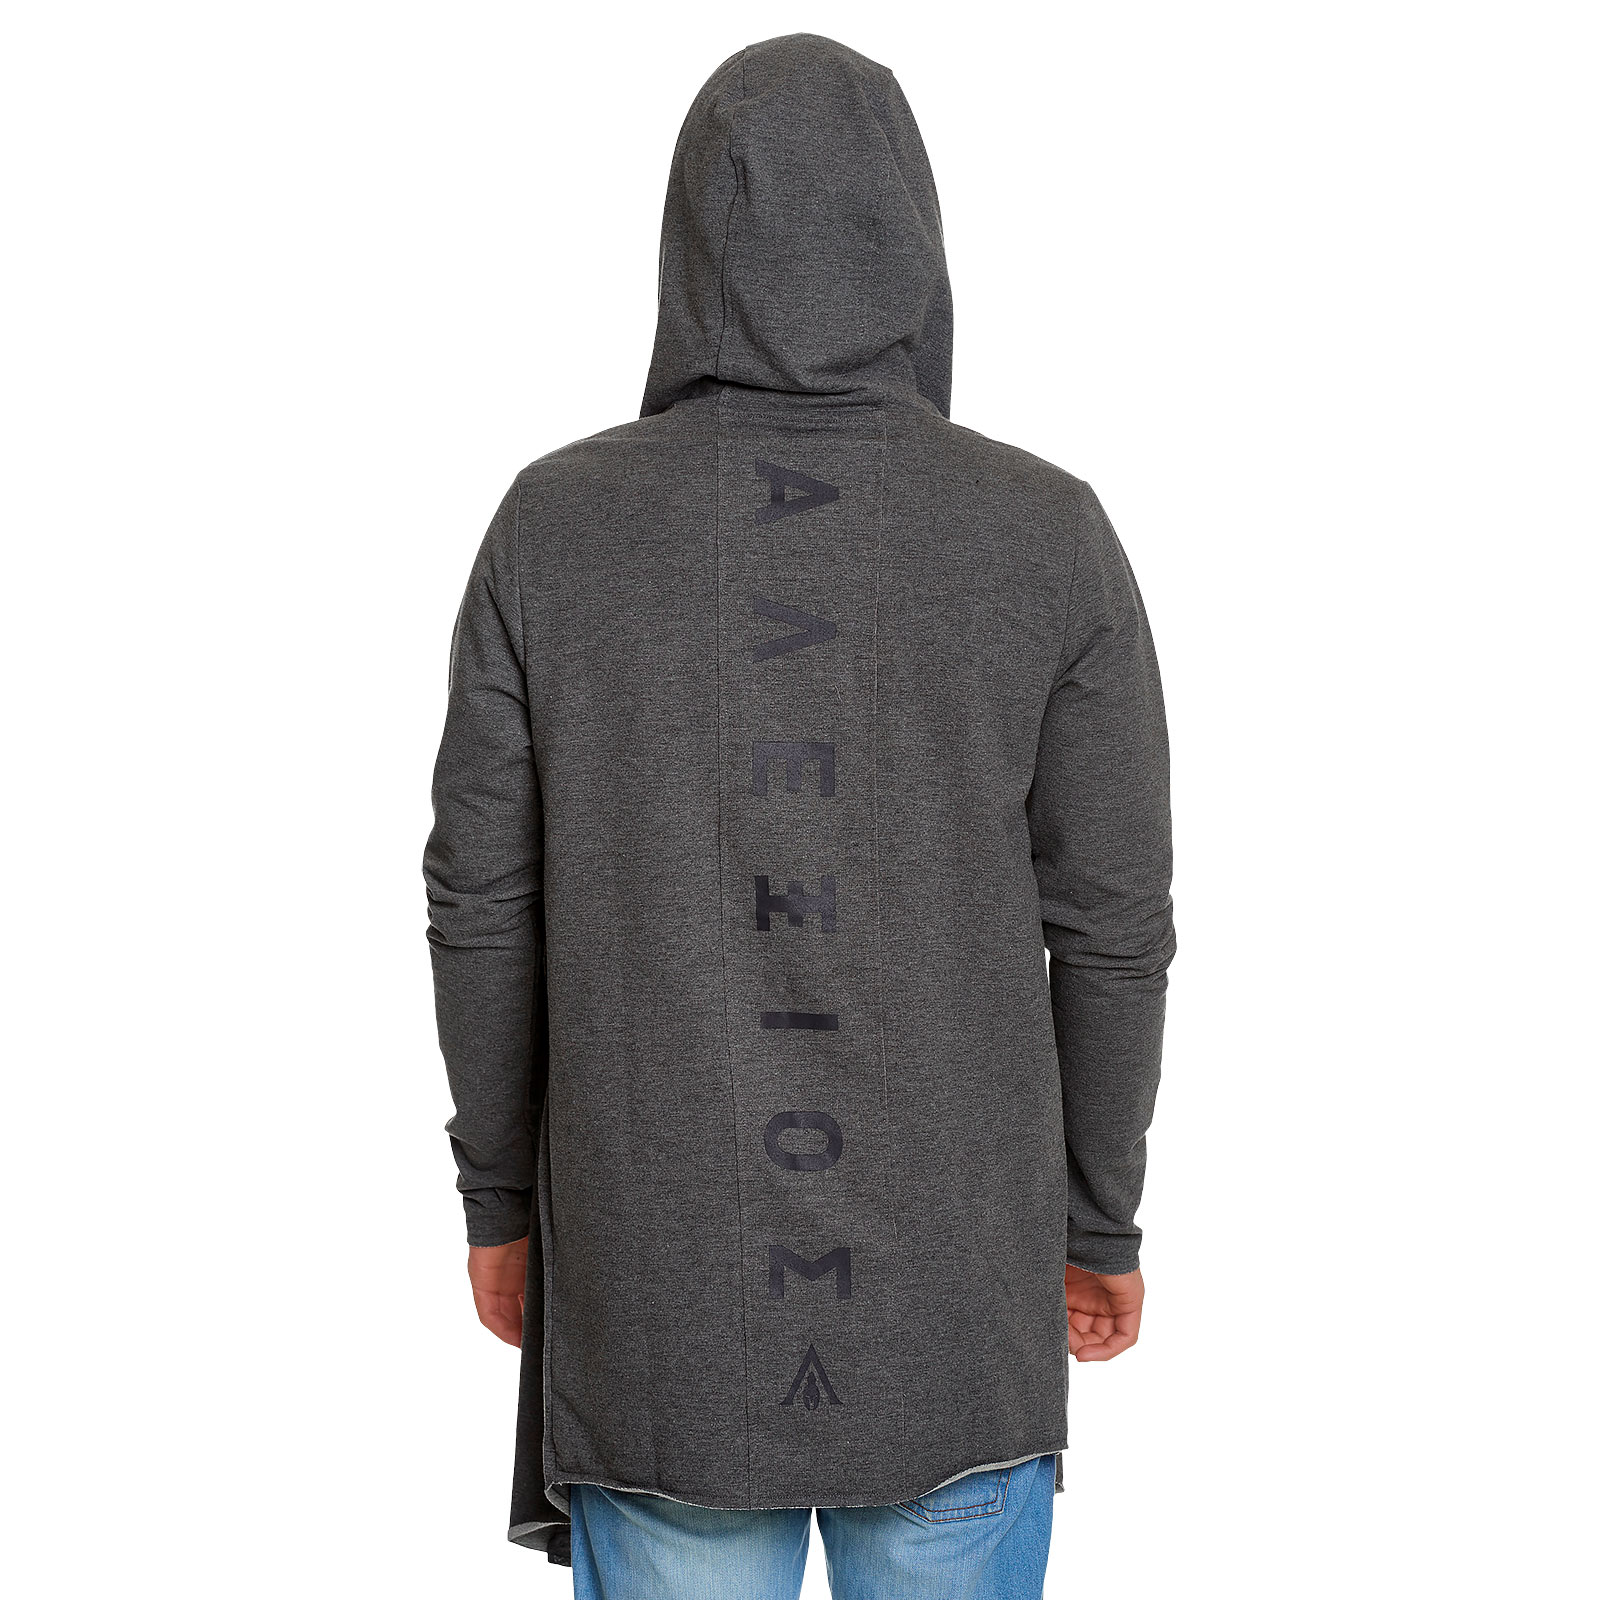 Assassins Creed - Odyssey Apocalyptic Warrior Hoodie